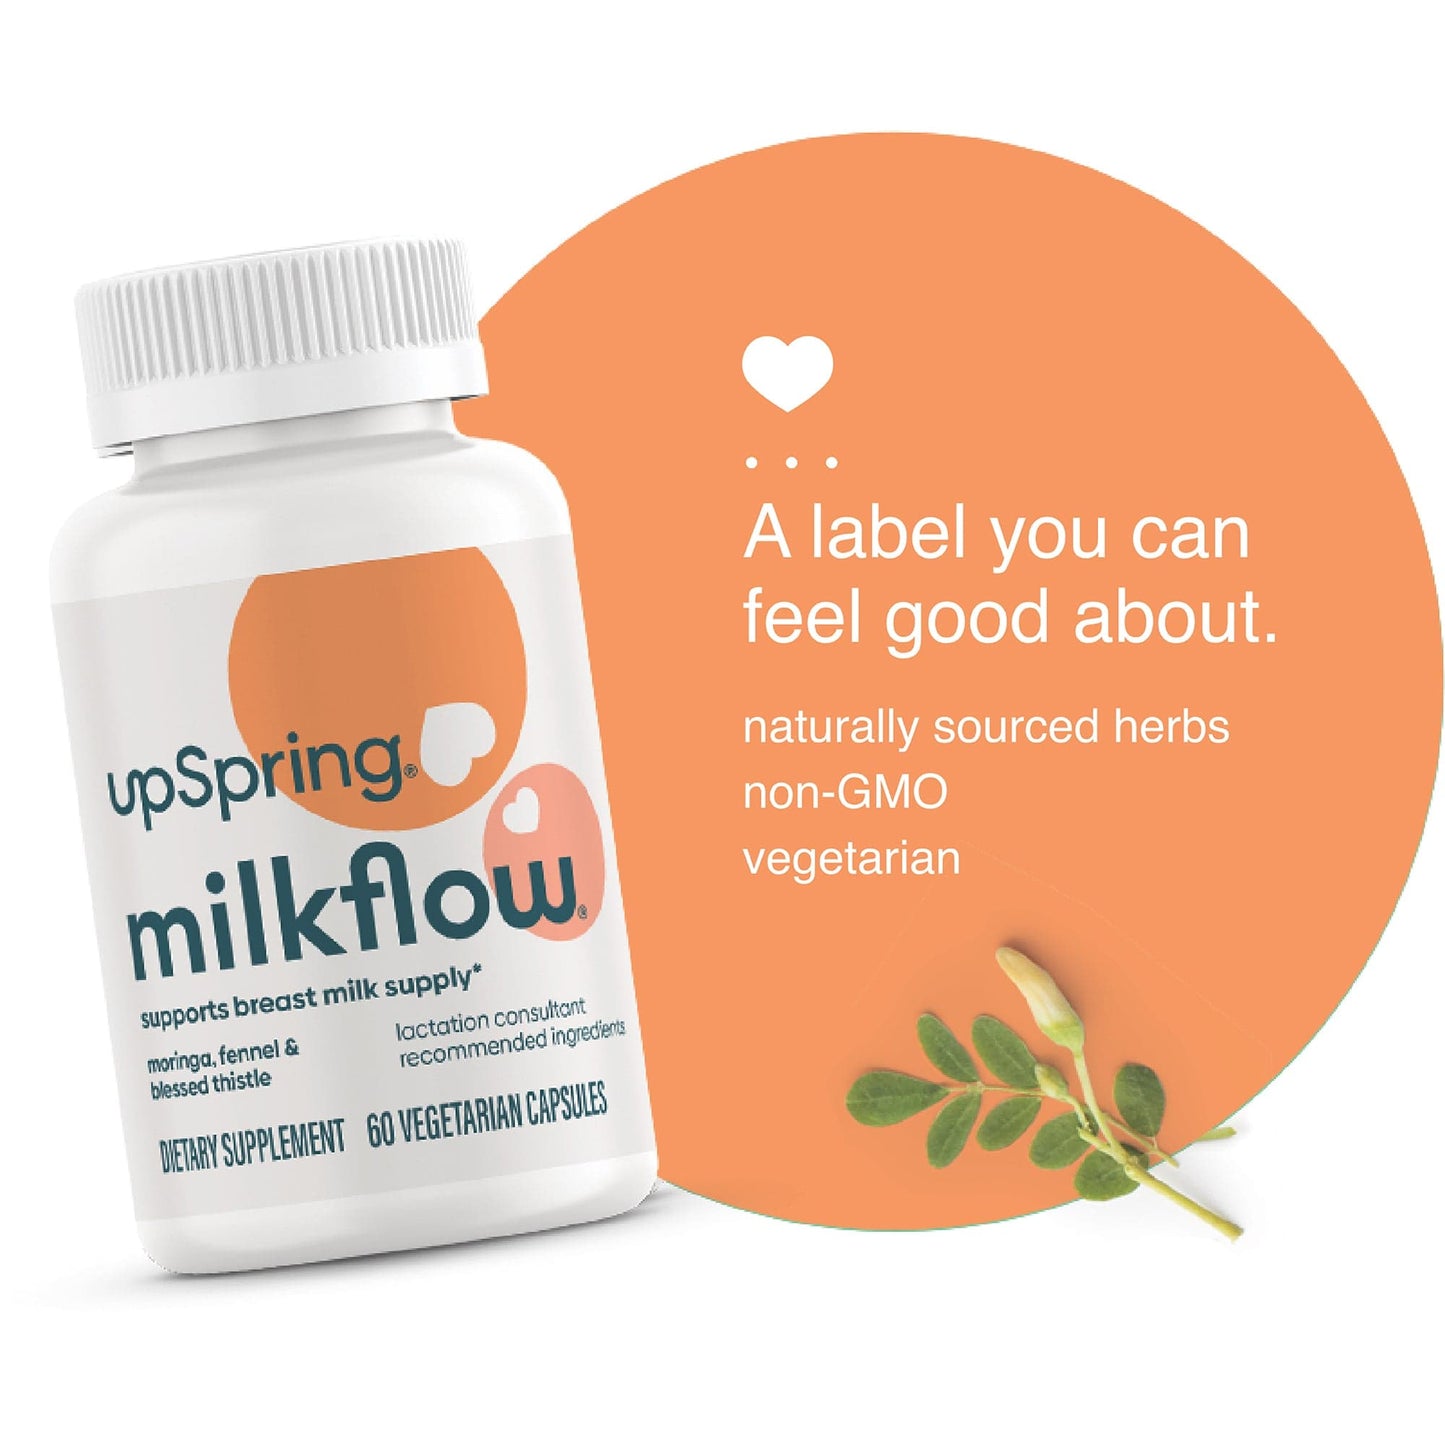 A bottle of 60 ct capsules of UpSpring MilkFlow moringa, fennel, and blessed thistle